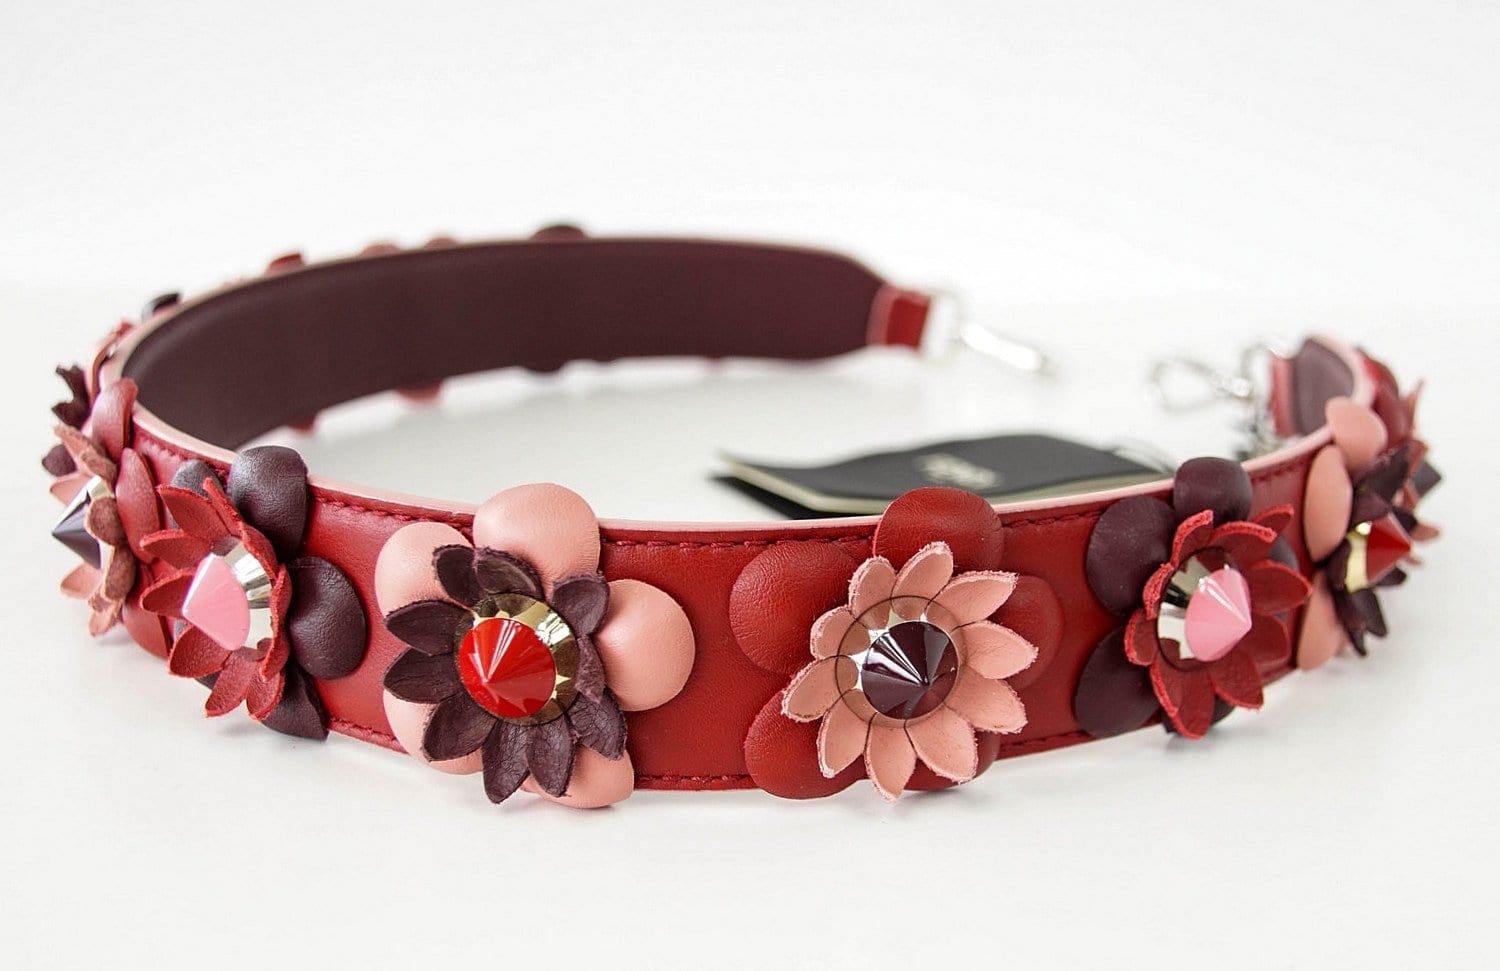 Fendi 3D Flower Strap You Elaphe Studded Leather Applique Limited Edition - mightychic